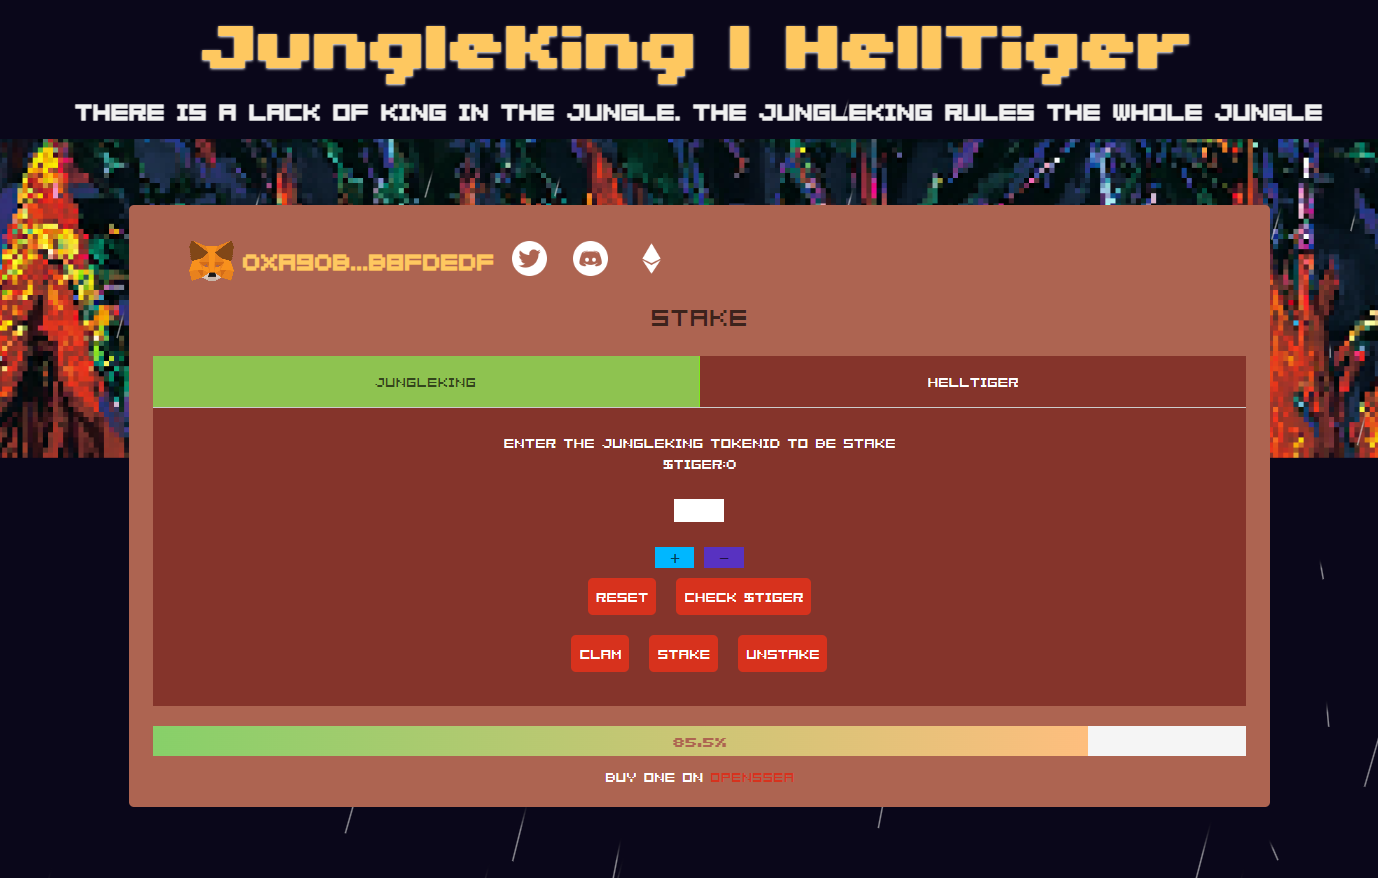 game image from JungleParty